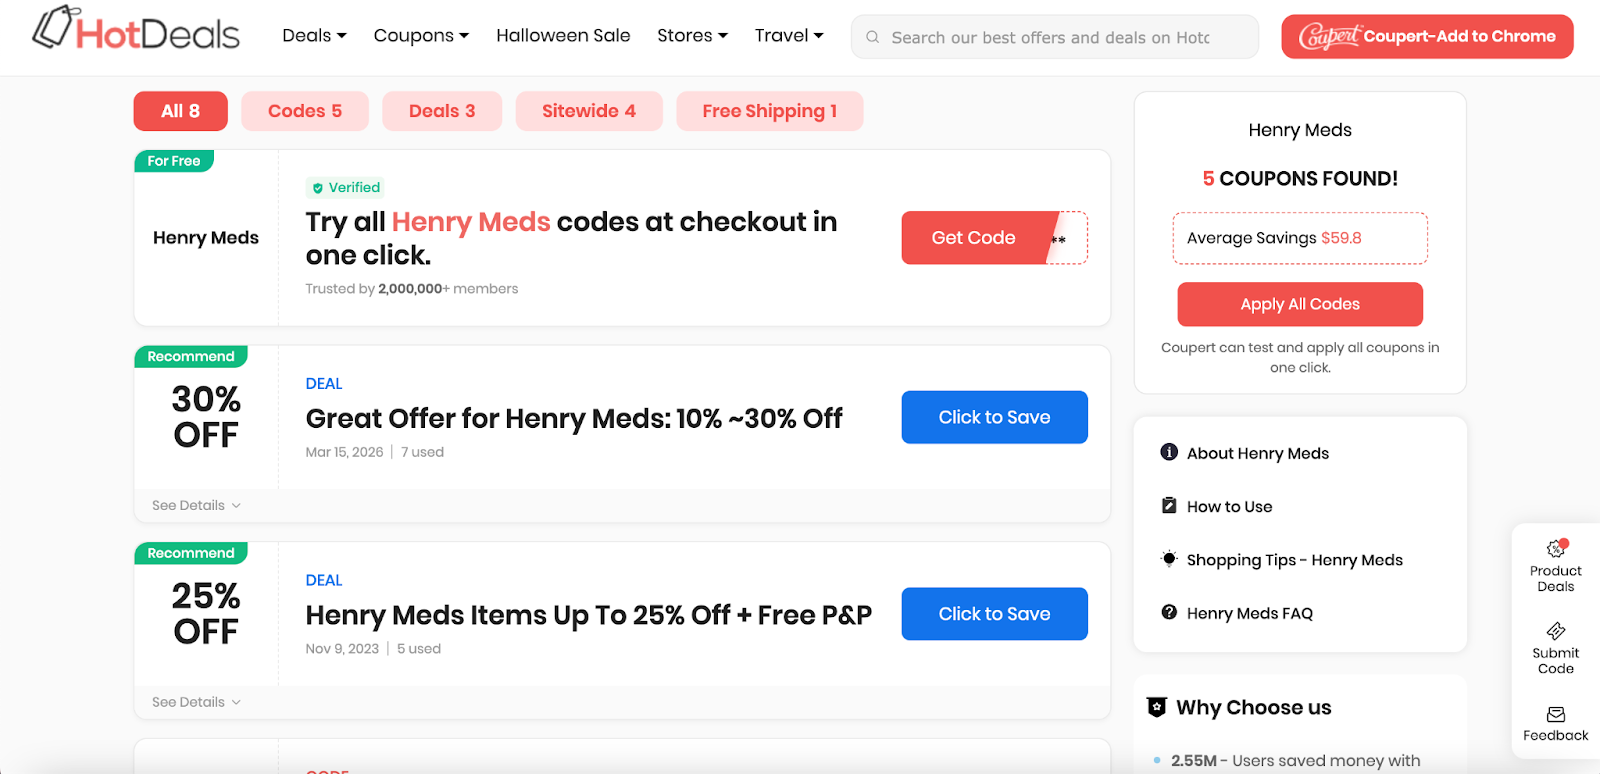 Examples of promo codes - Successful Holiday Marketing Campaigns